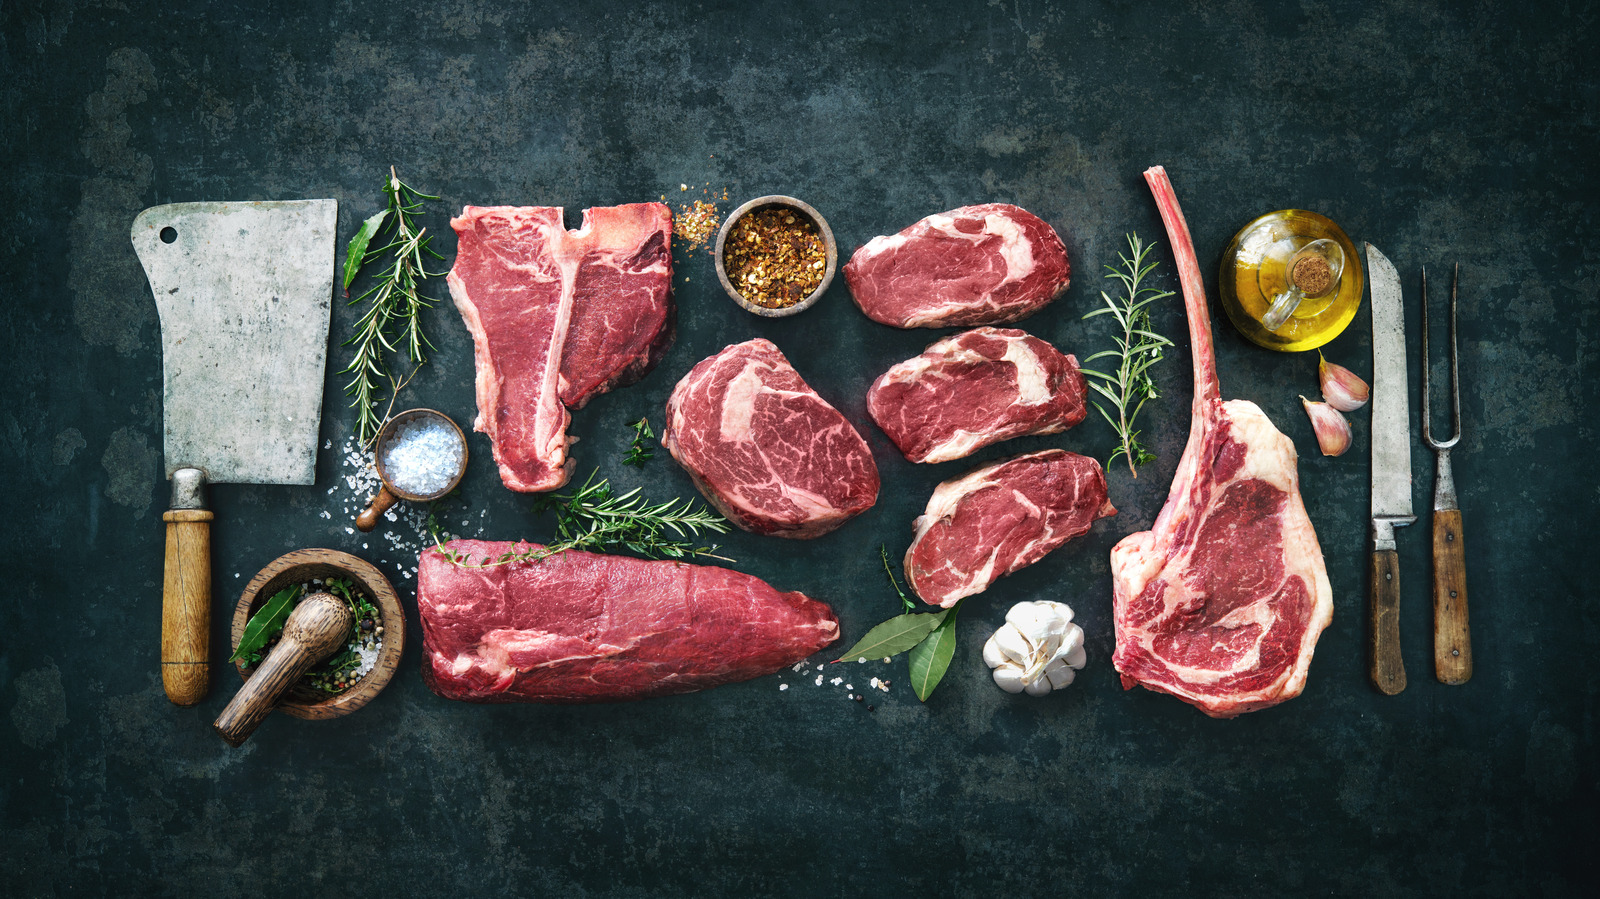 Cattlemen's Steakhouse - What Are the Best Cuts of Steak?